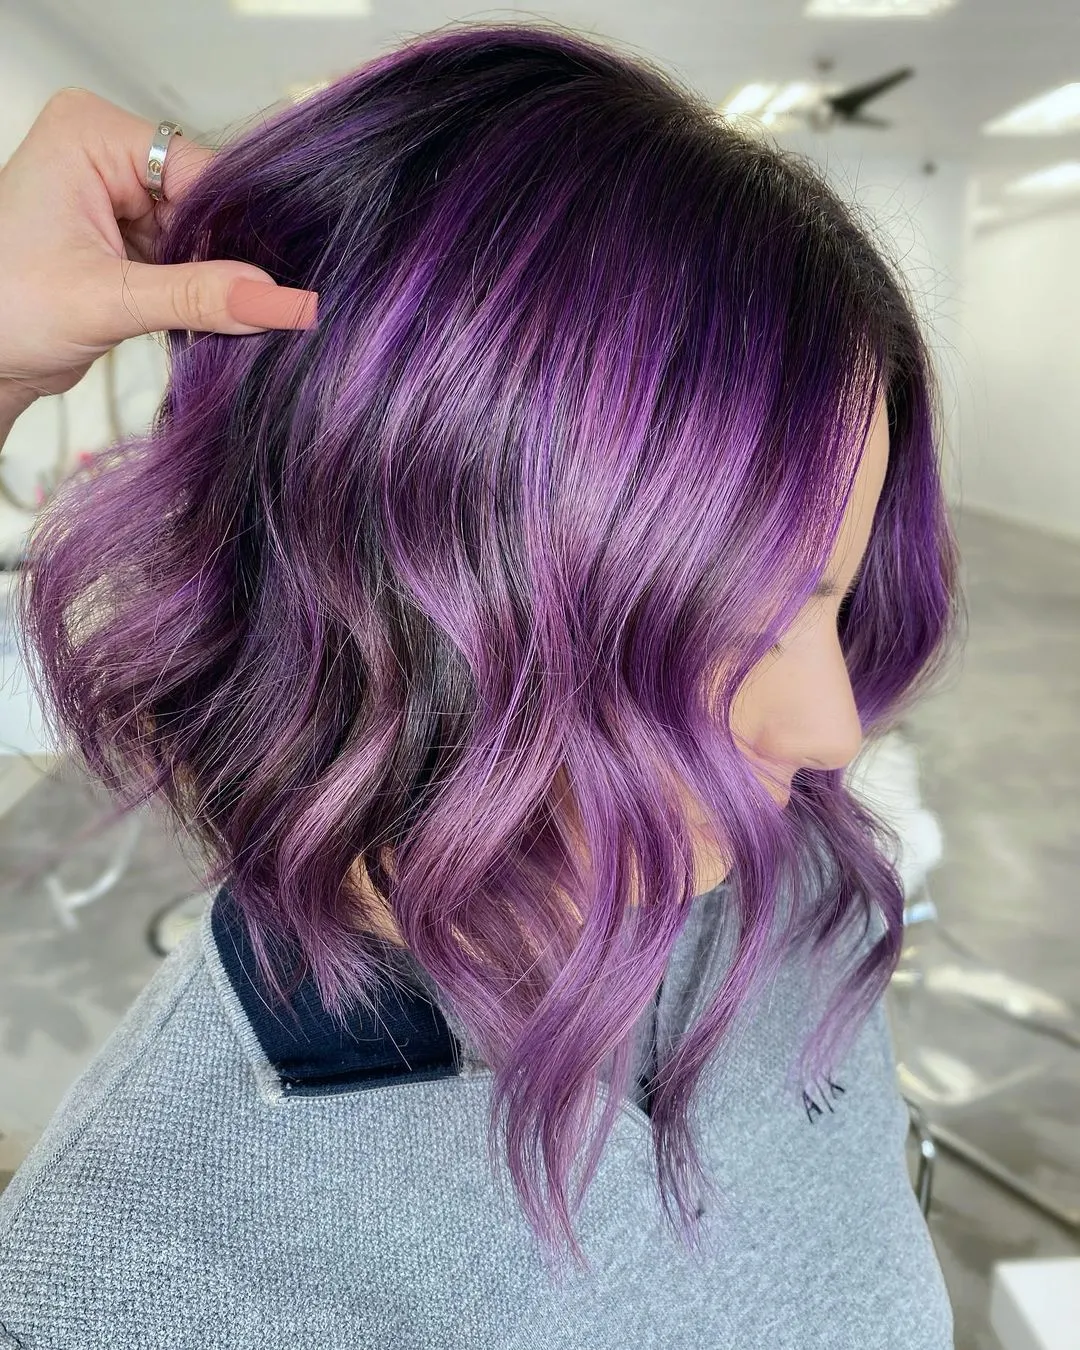 Side view of  lady rocking the purple color hair